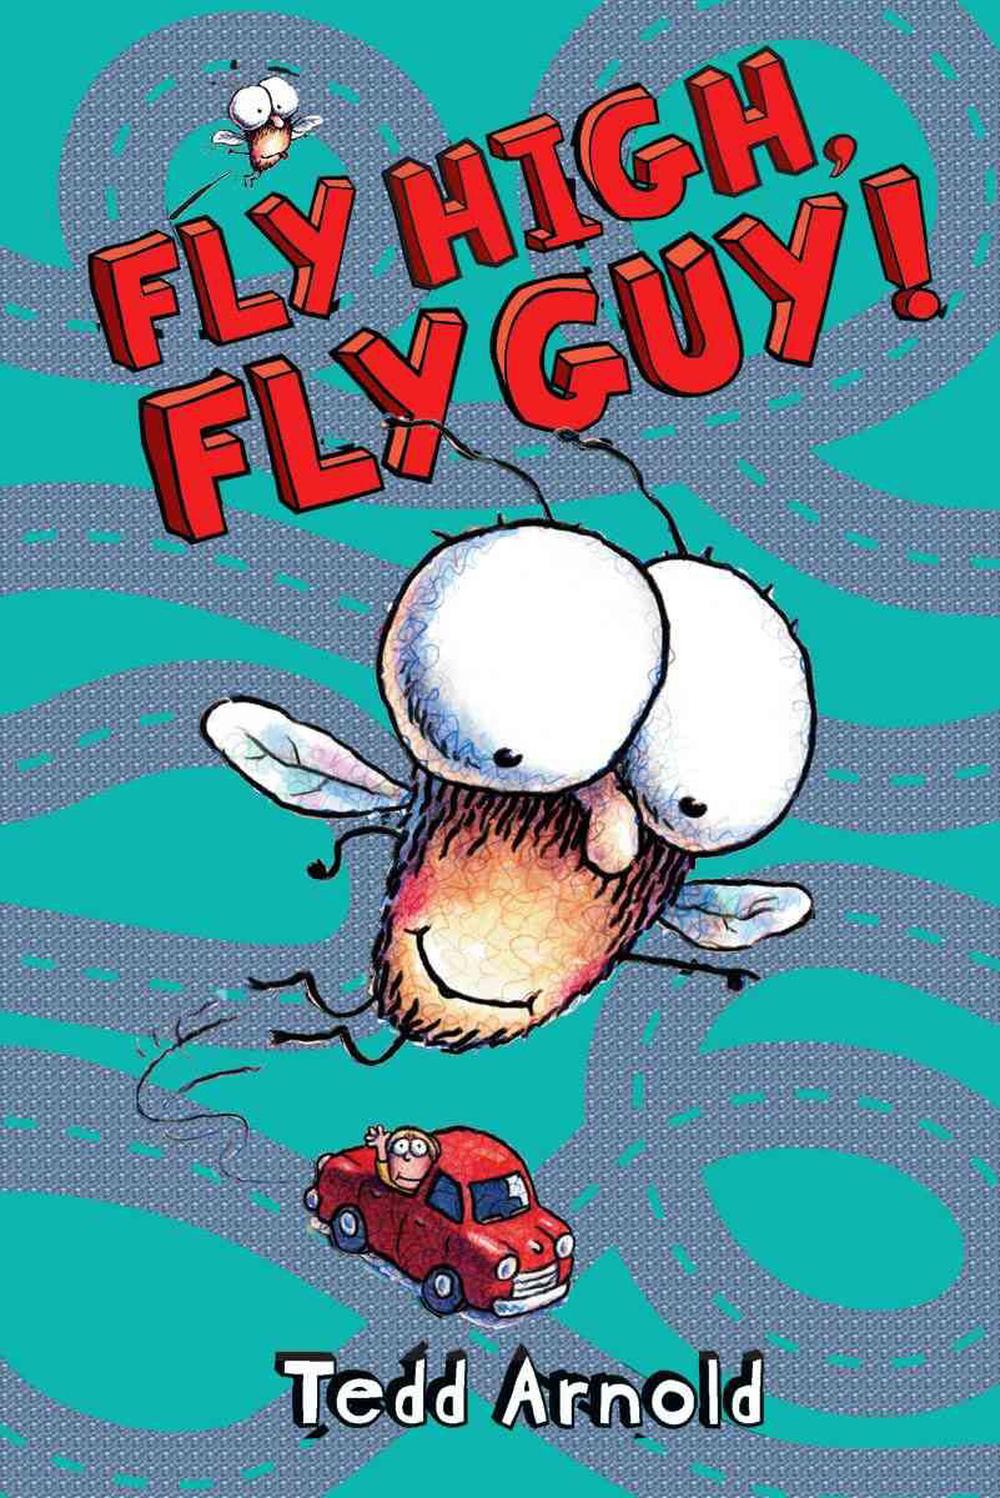 Fly High Fly Guy By Tedd Arnold English Hardcover Book Free Shipping 9780545007221 Ebay 